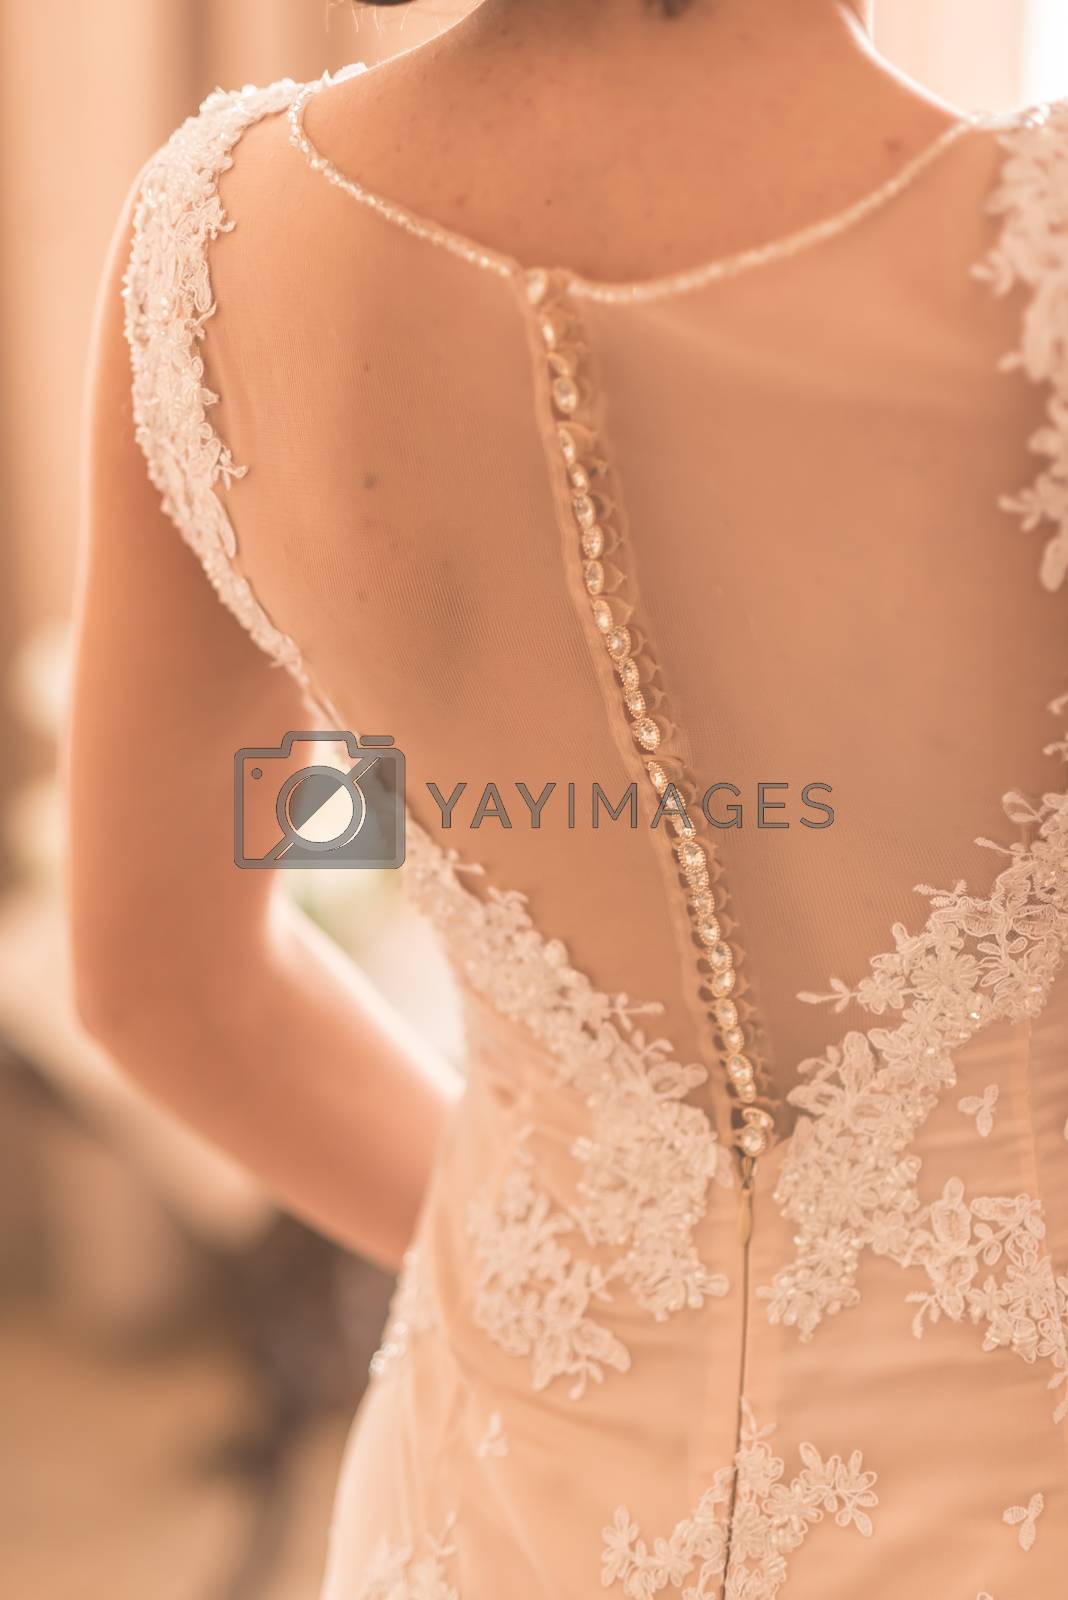 Royalty free image of wedding dress by Andreua